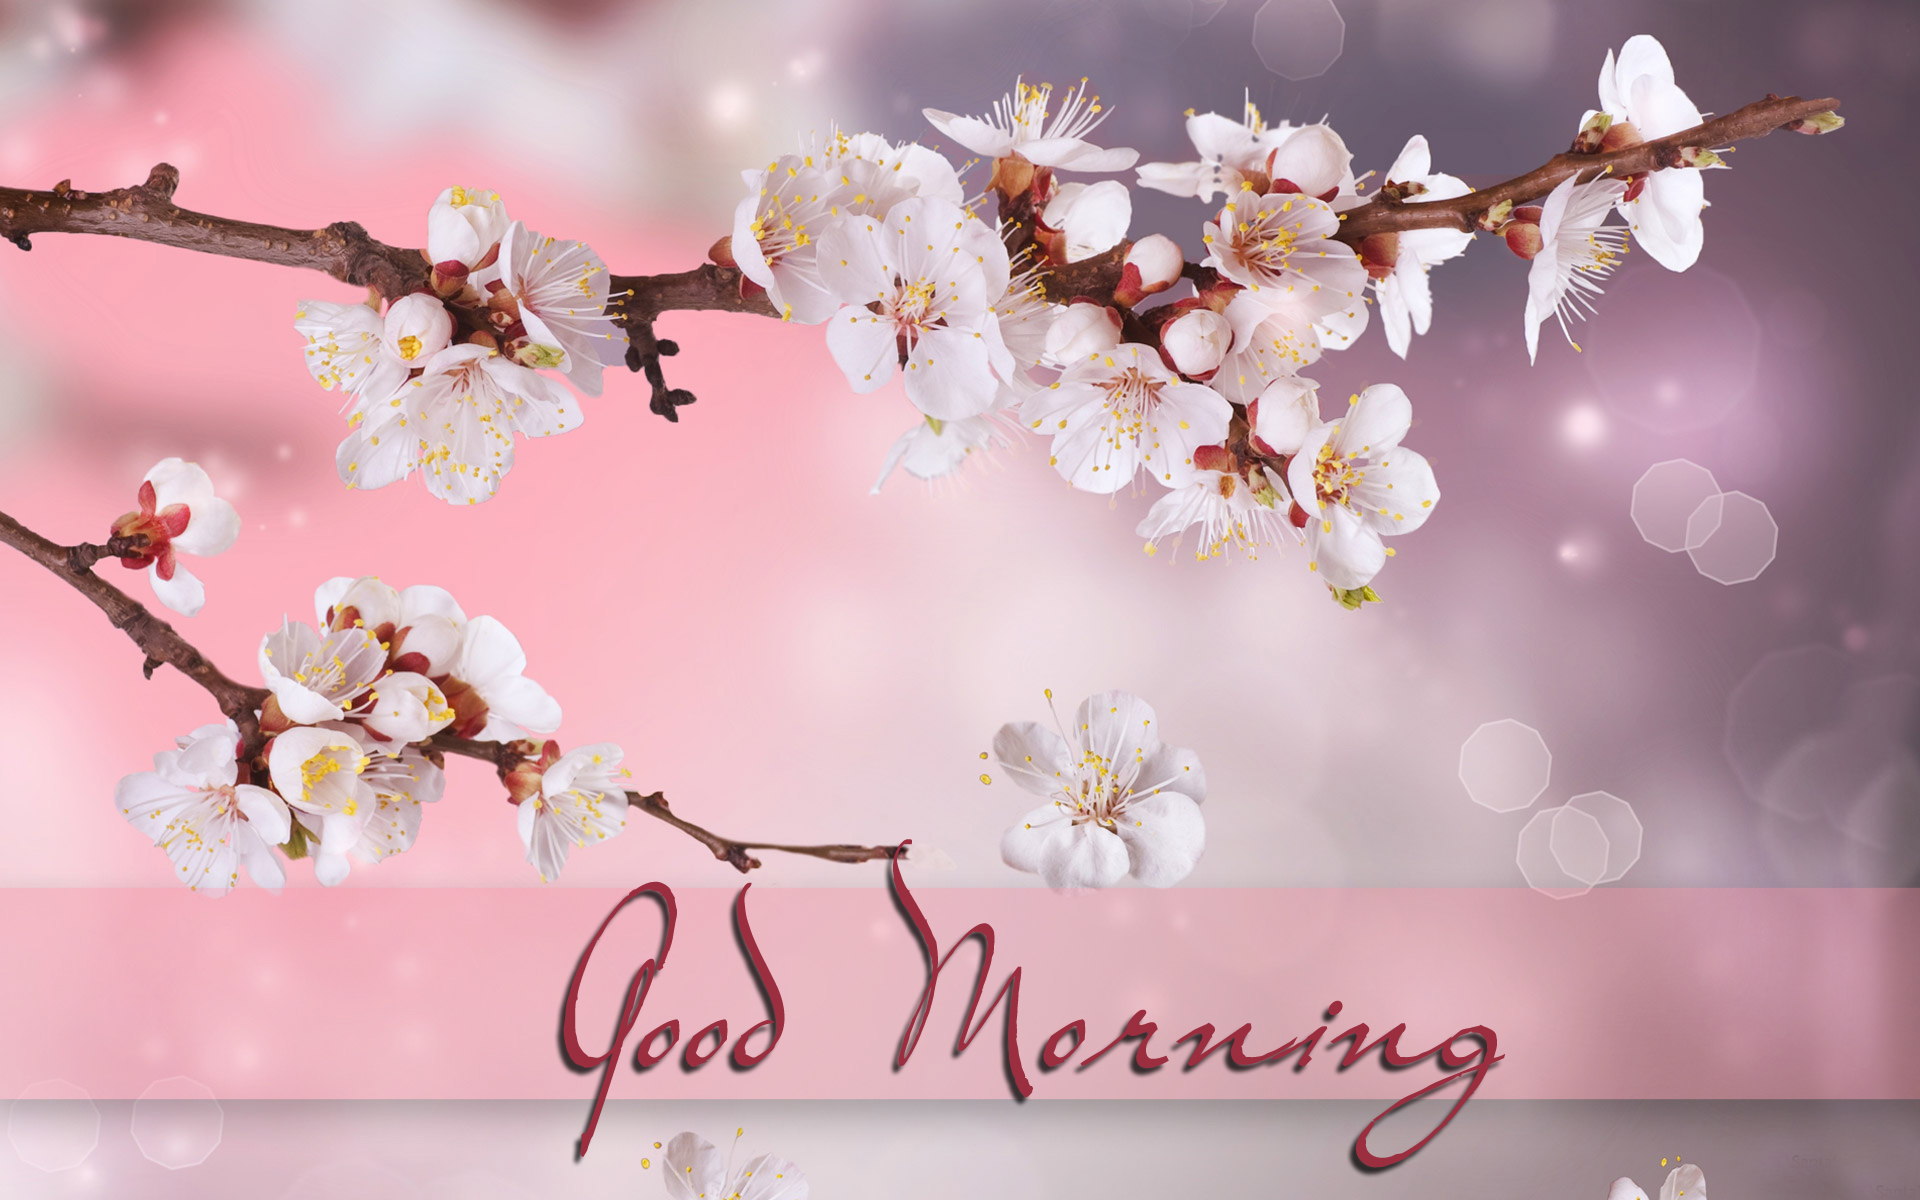 Good Morning Wallpaper Pictures Image